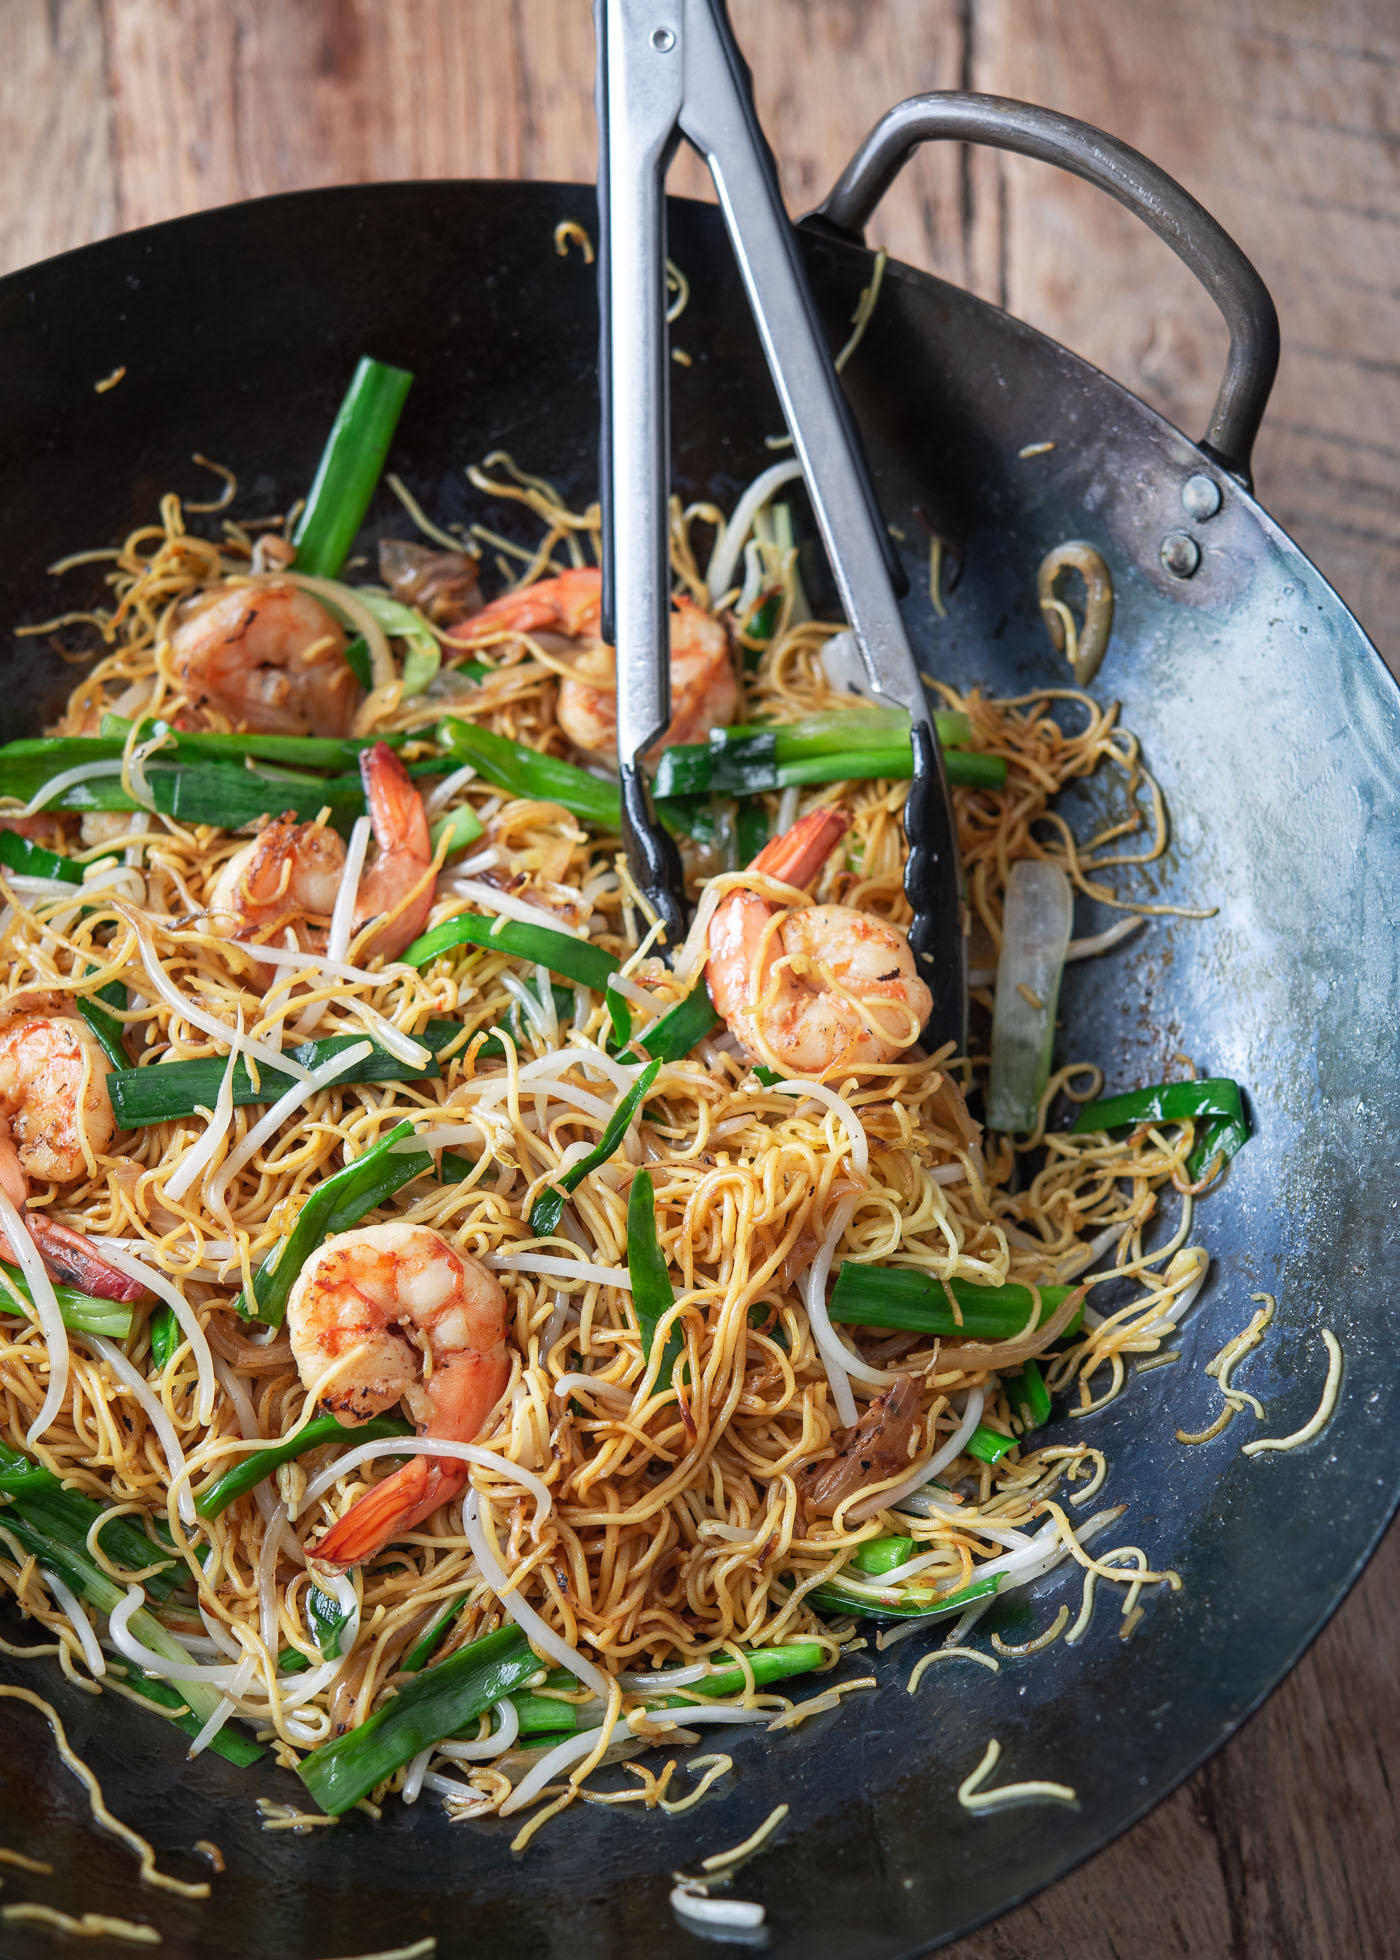 Pan-fried Hong Kong noodles with shrimp in a wok.